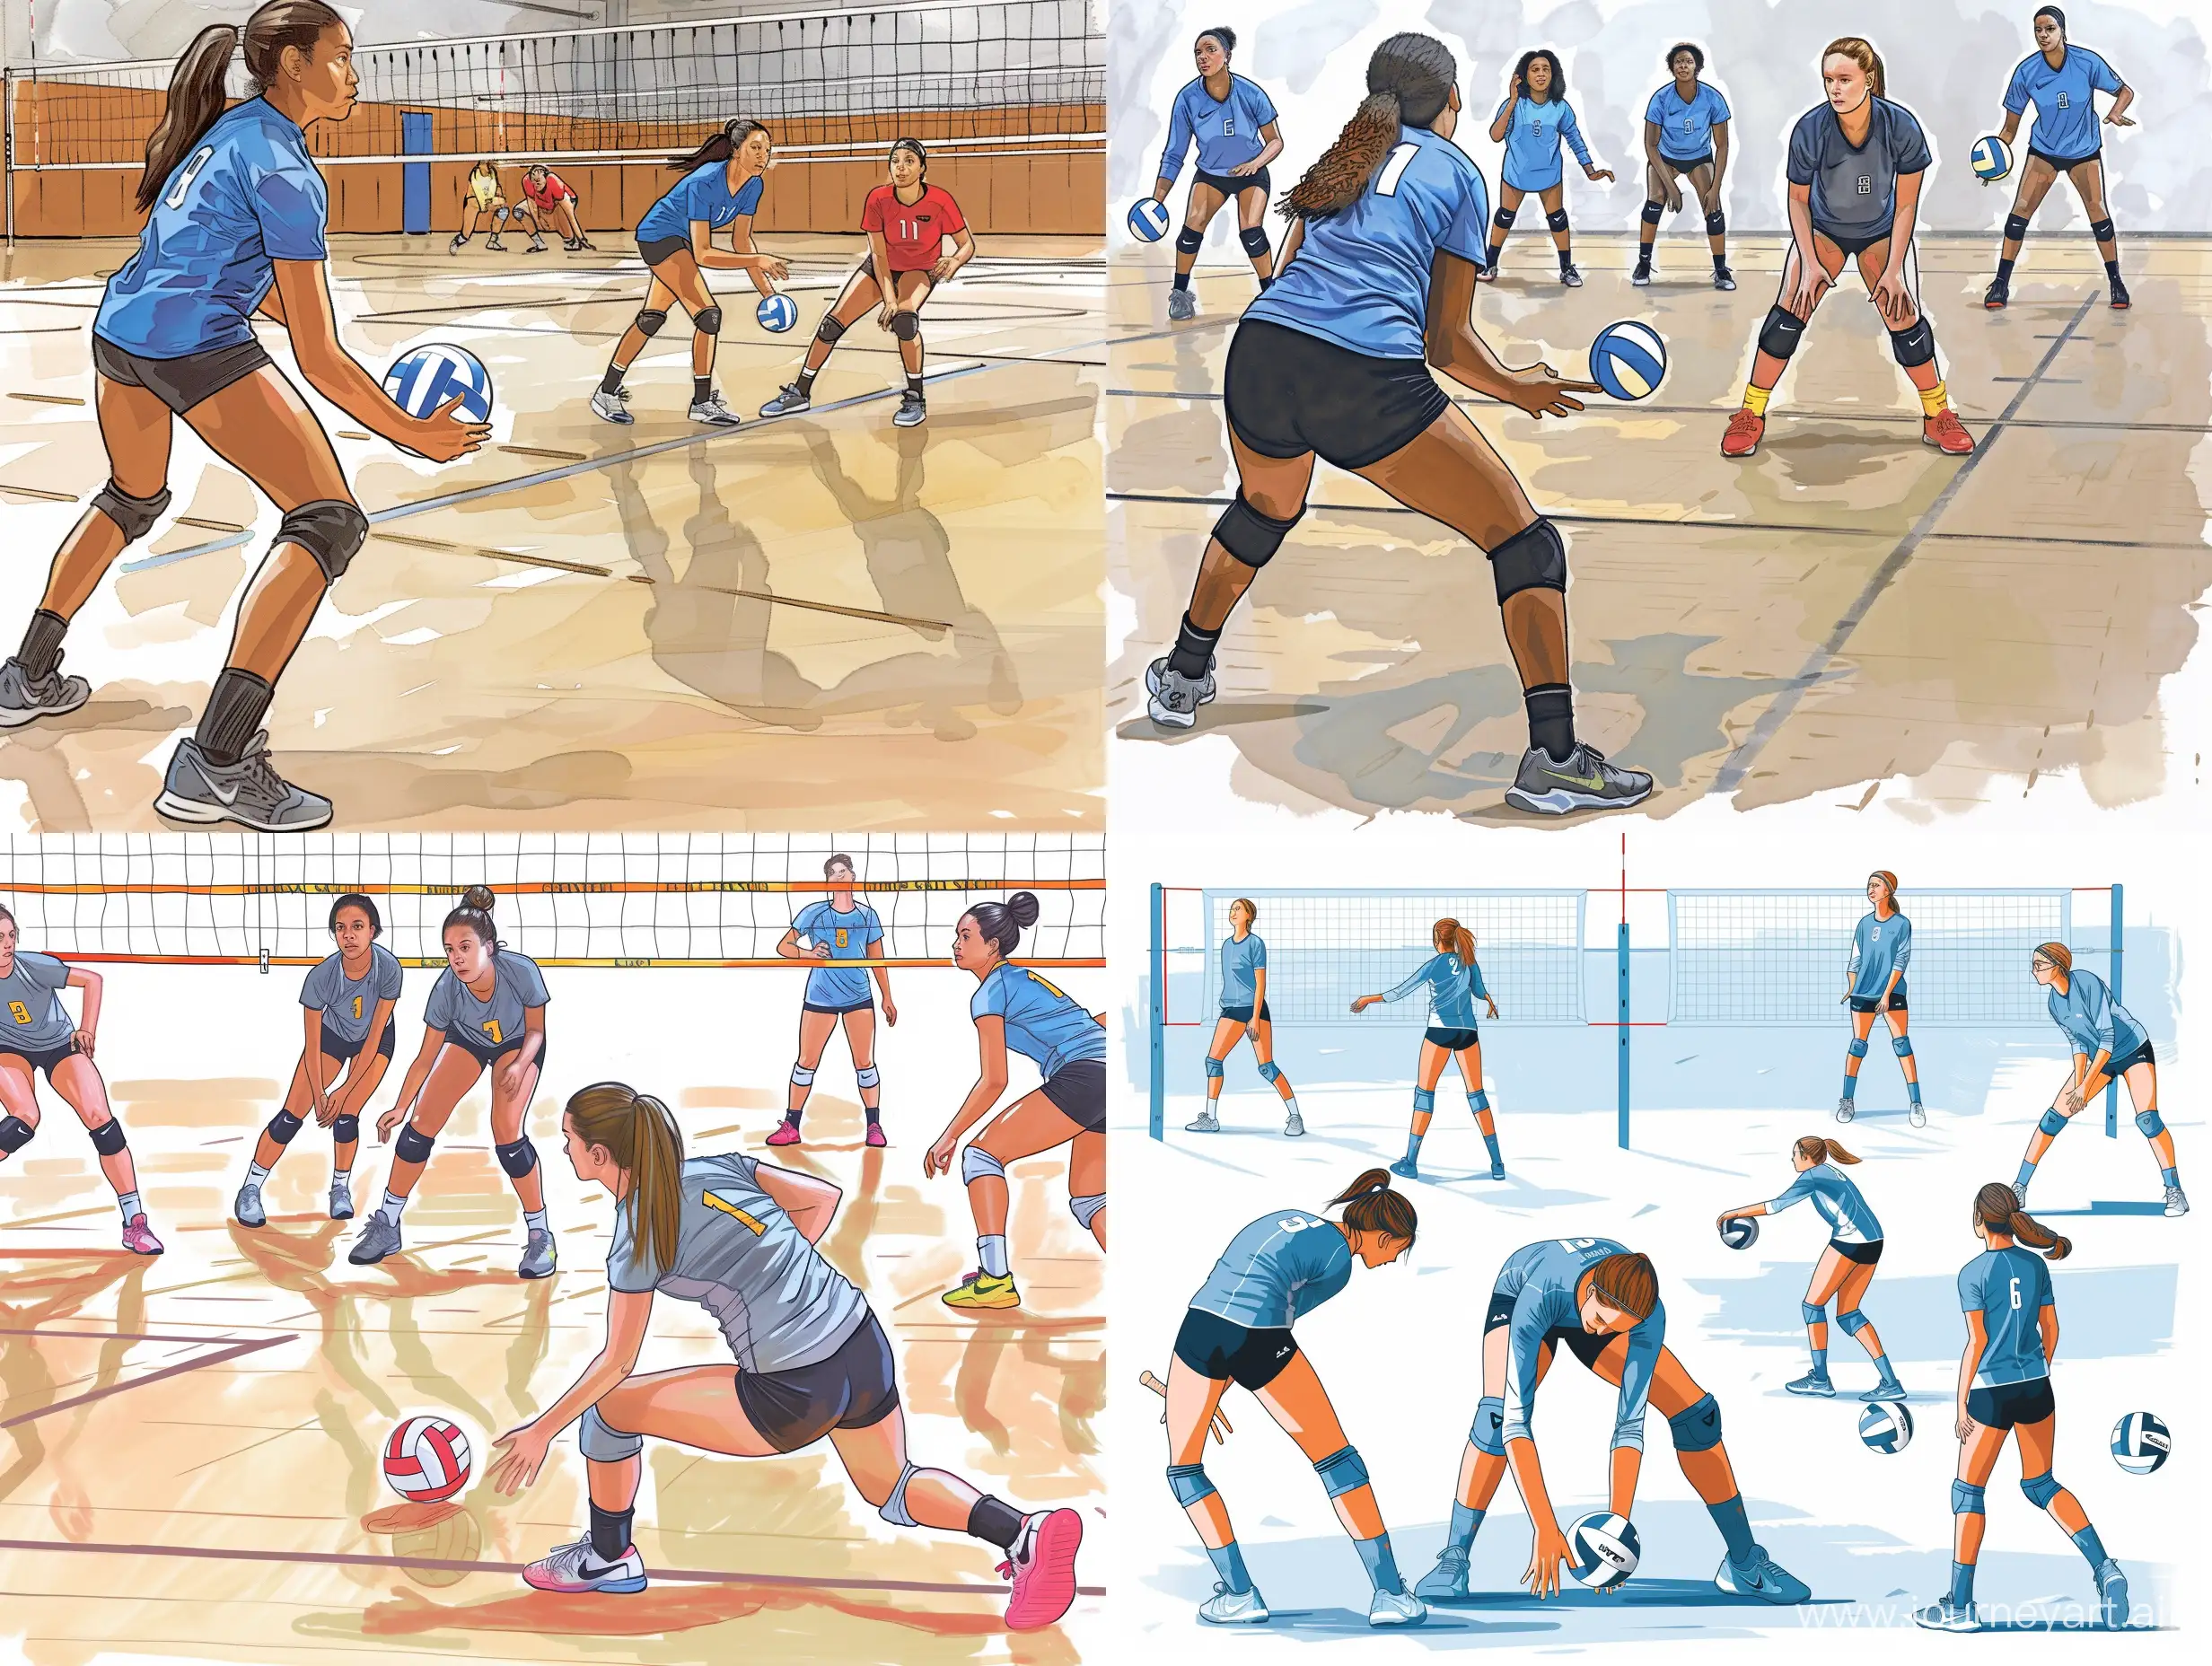 Skill Development Graphics: Create graphics illustrating various indoor volleyball techniques and drills taught at the camp, accompanied by concise descriptions to inform potential participants about the skills they will learn.